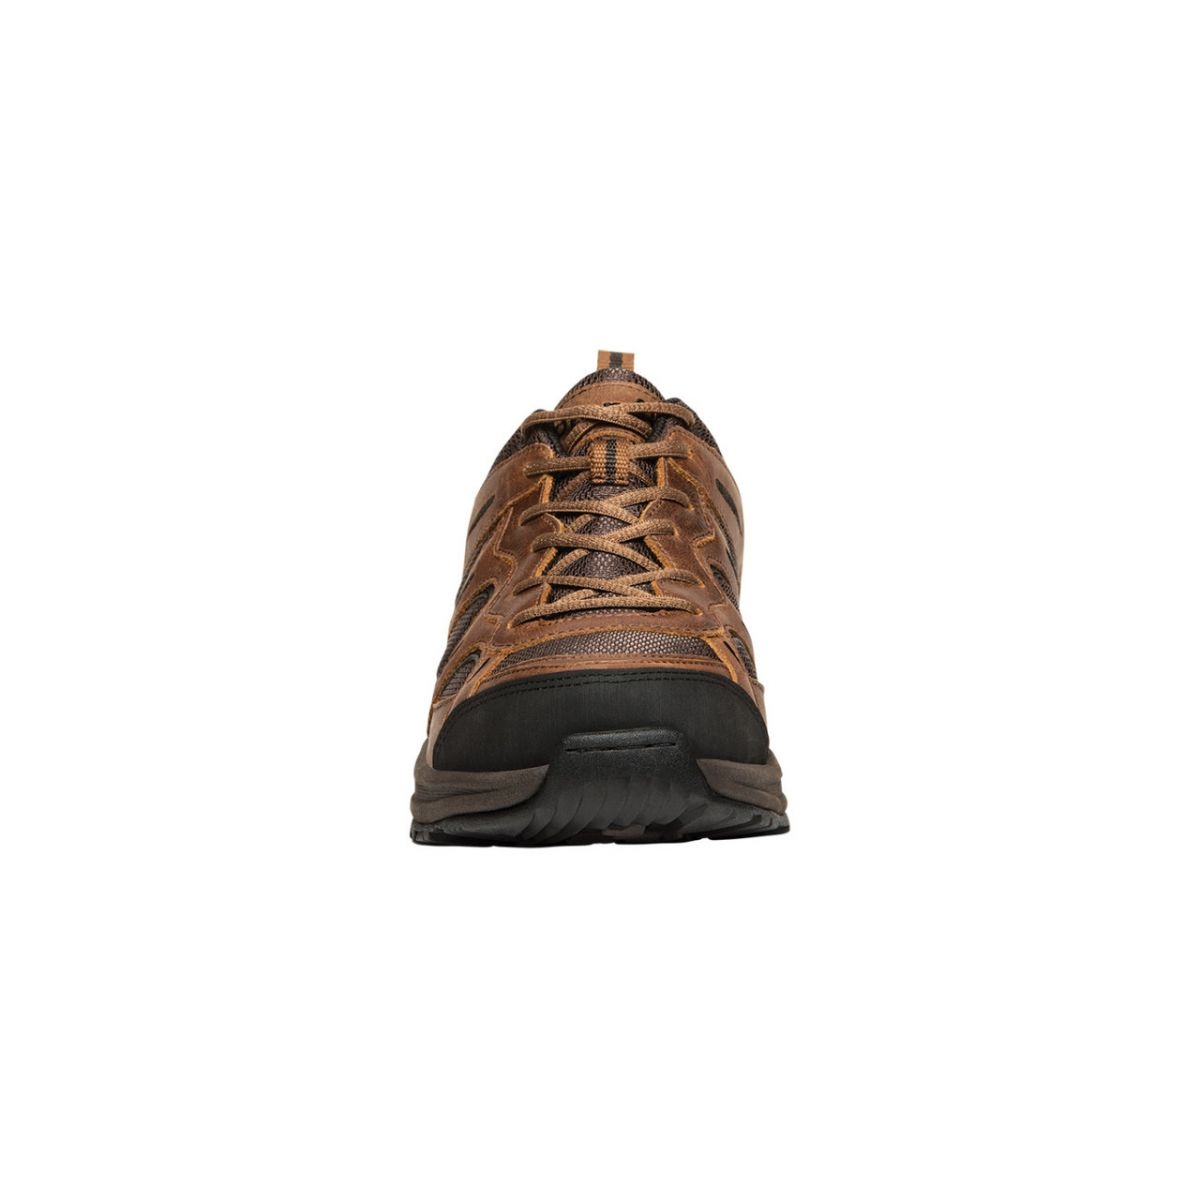 Propet Men's Connelly Hiking Shoe Brown - M5503BR BROWN - BROWN, 9.5-D